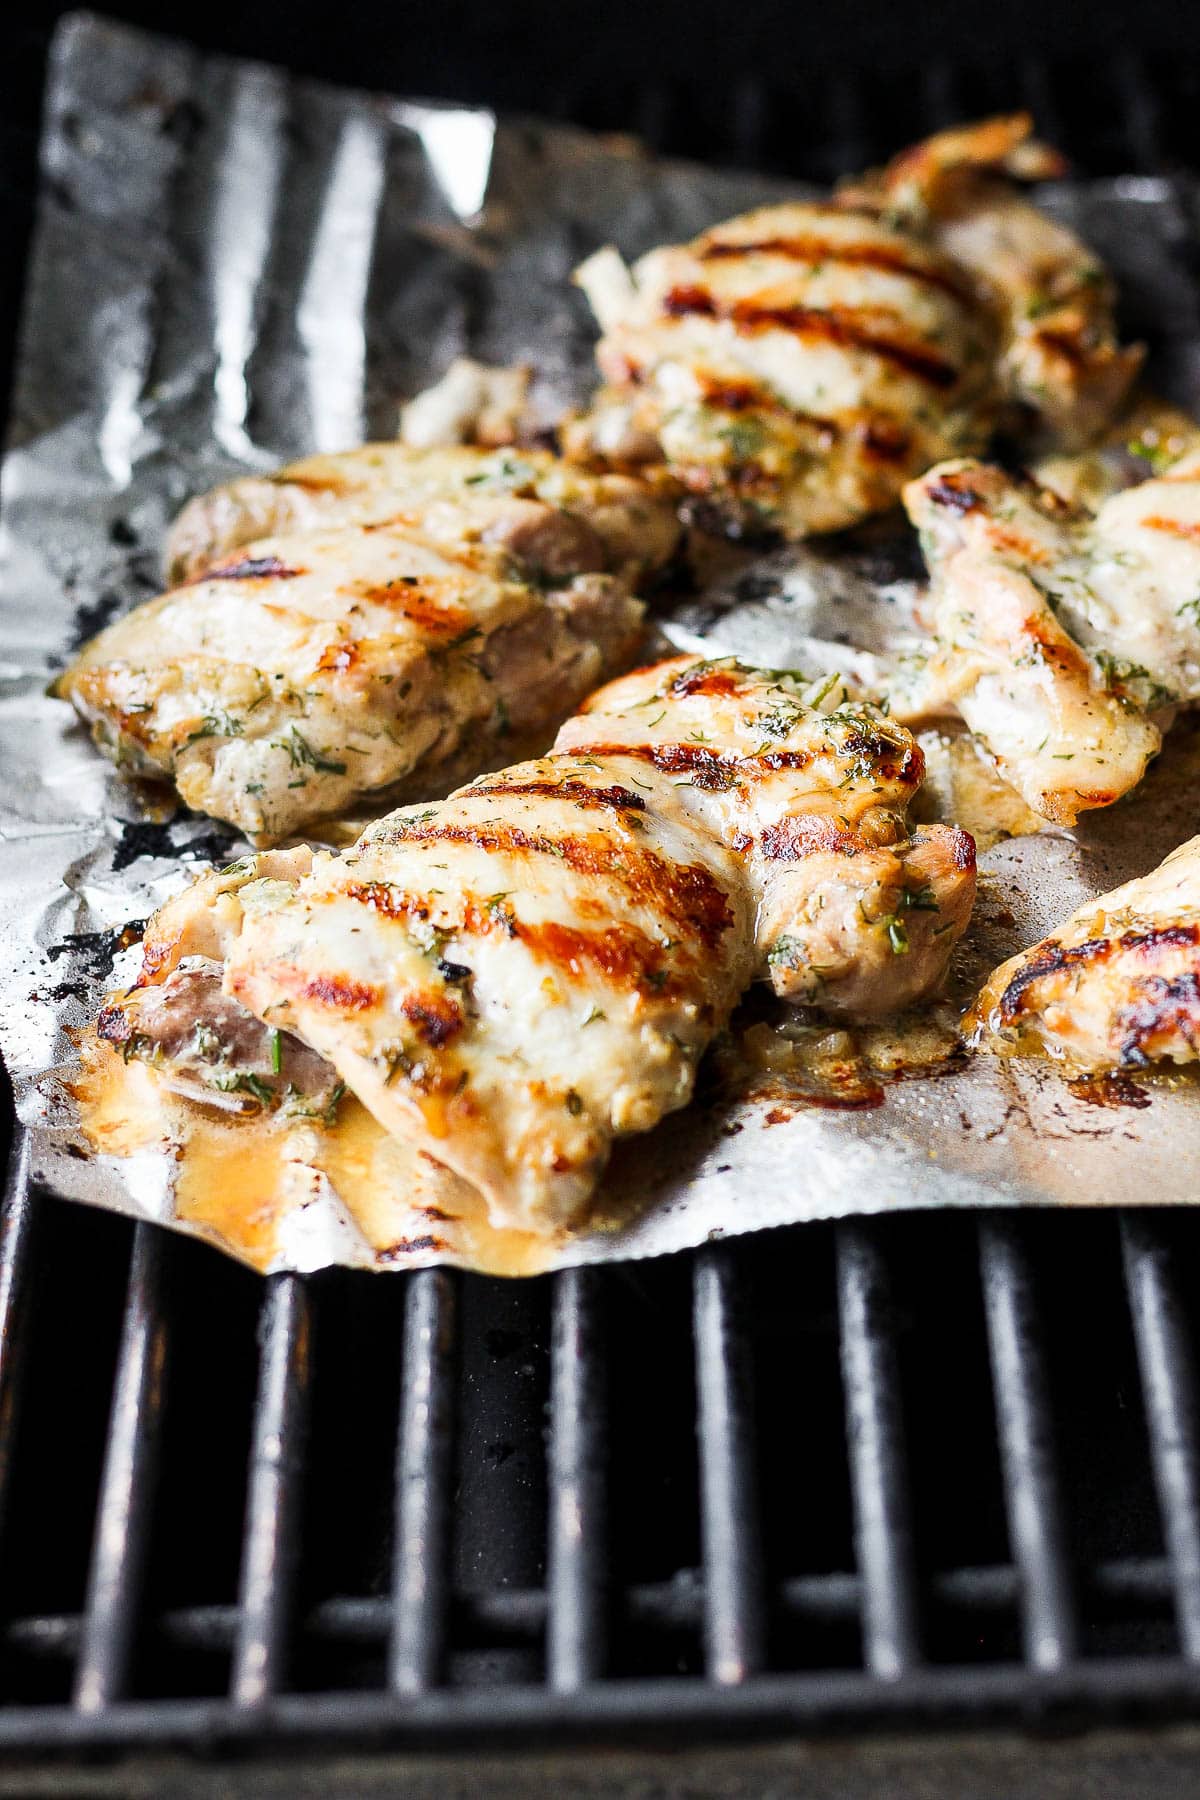 A sheet of heavy duty foil on top of grill grates.  The marinated chicken is on top of the foil.